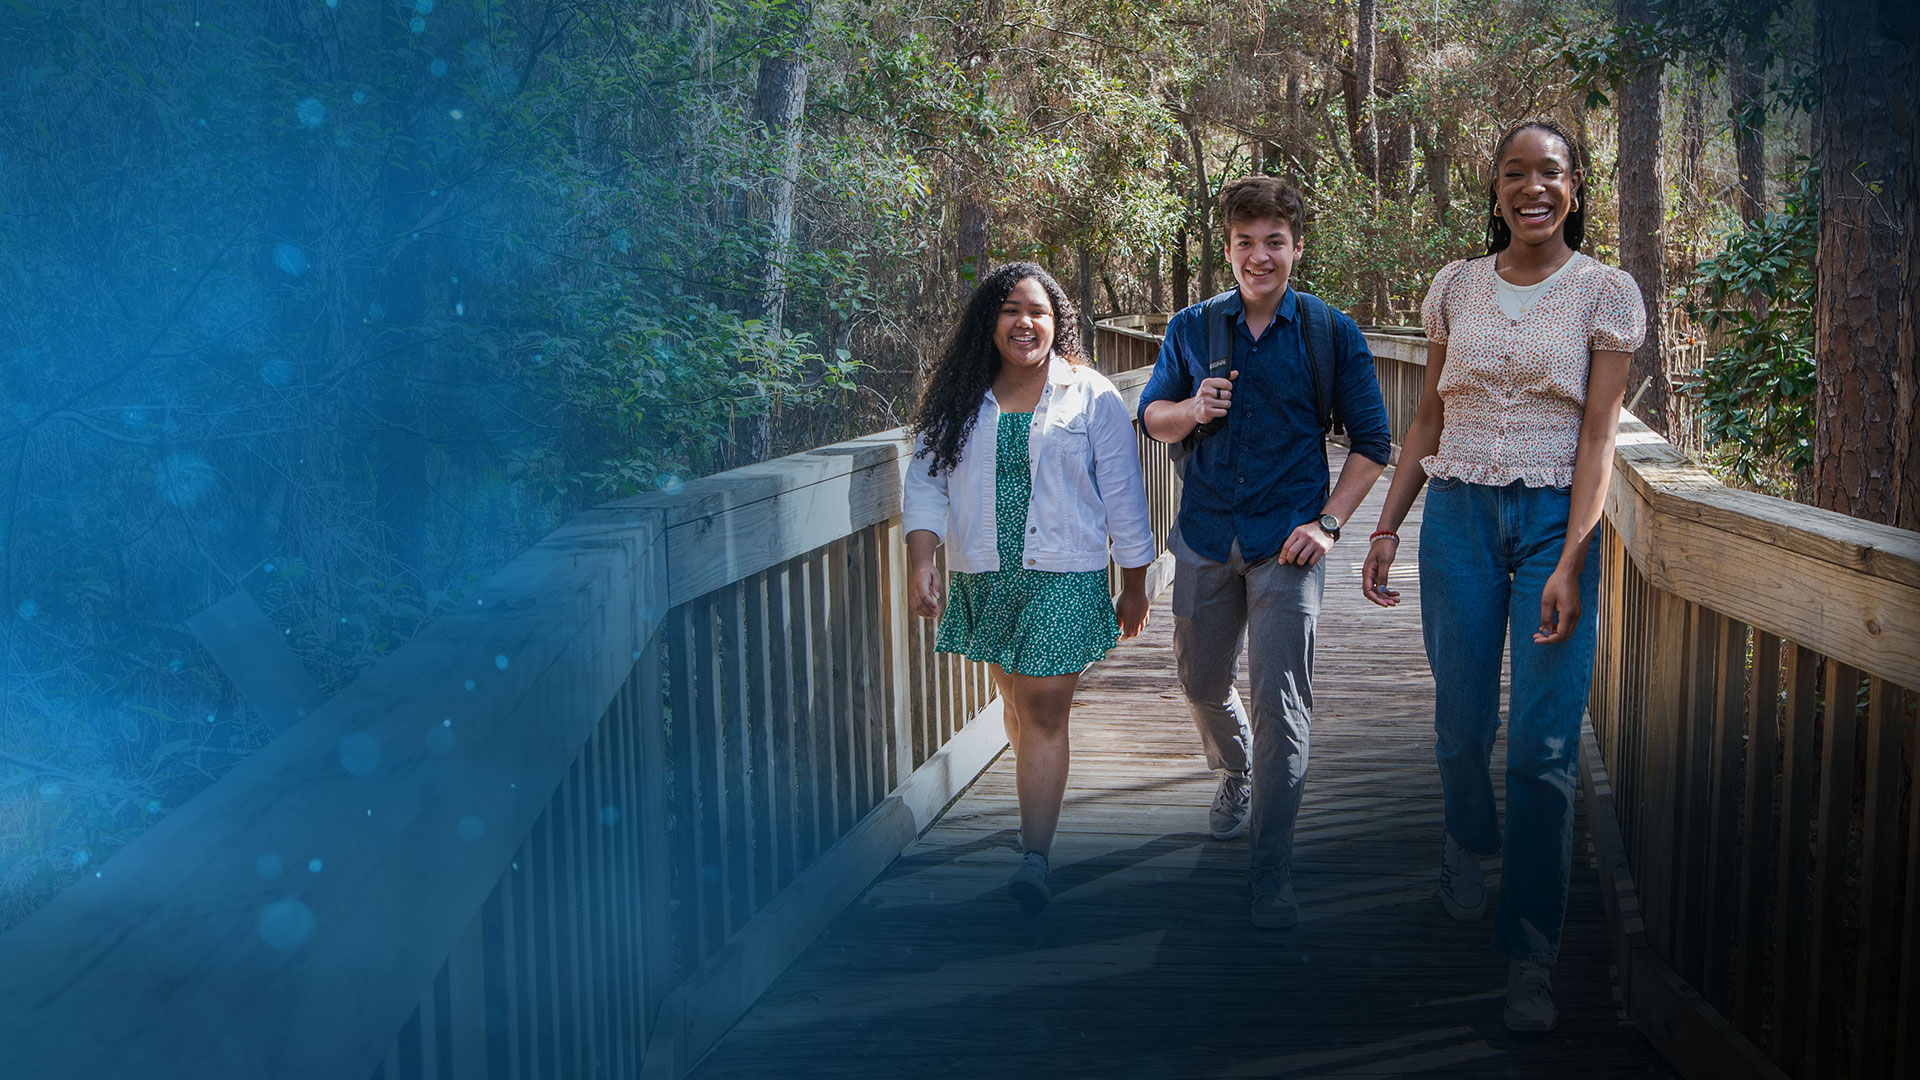 SPC students smiling walking on a boardwalk at the Seminole Campus